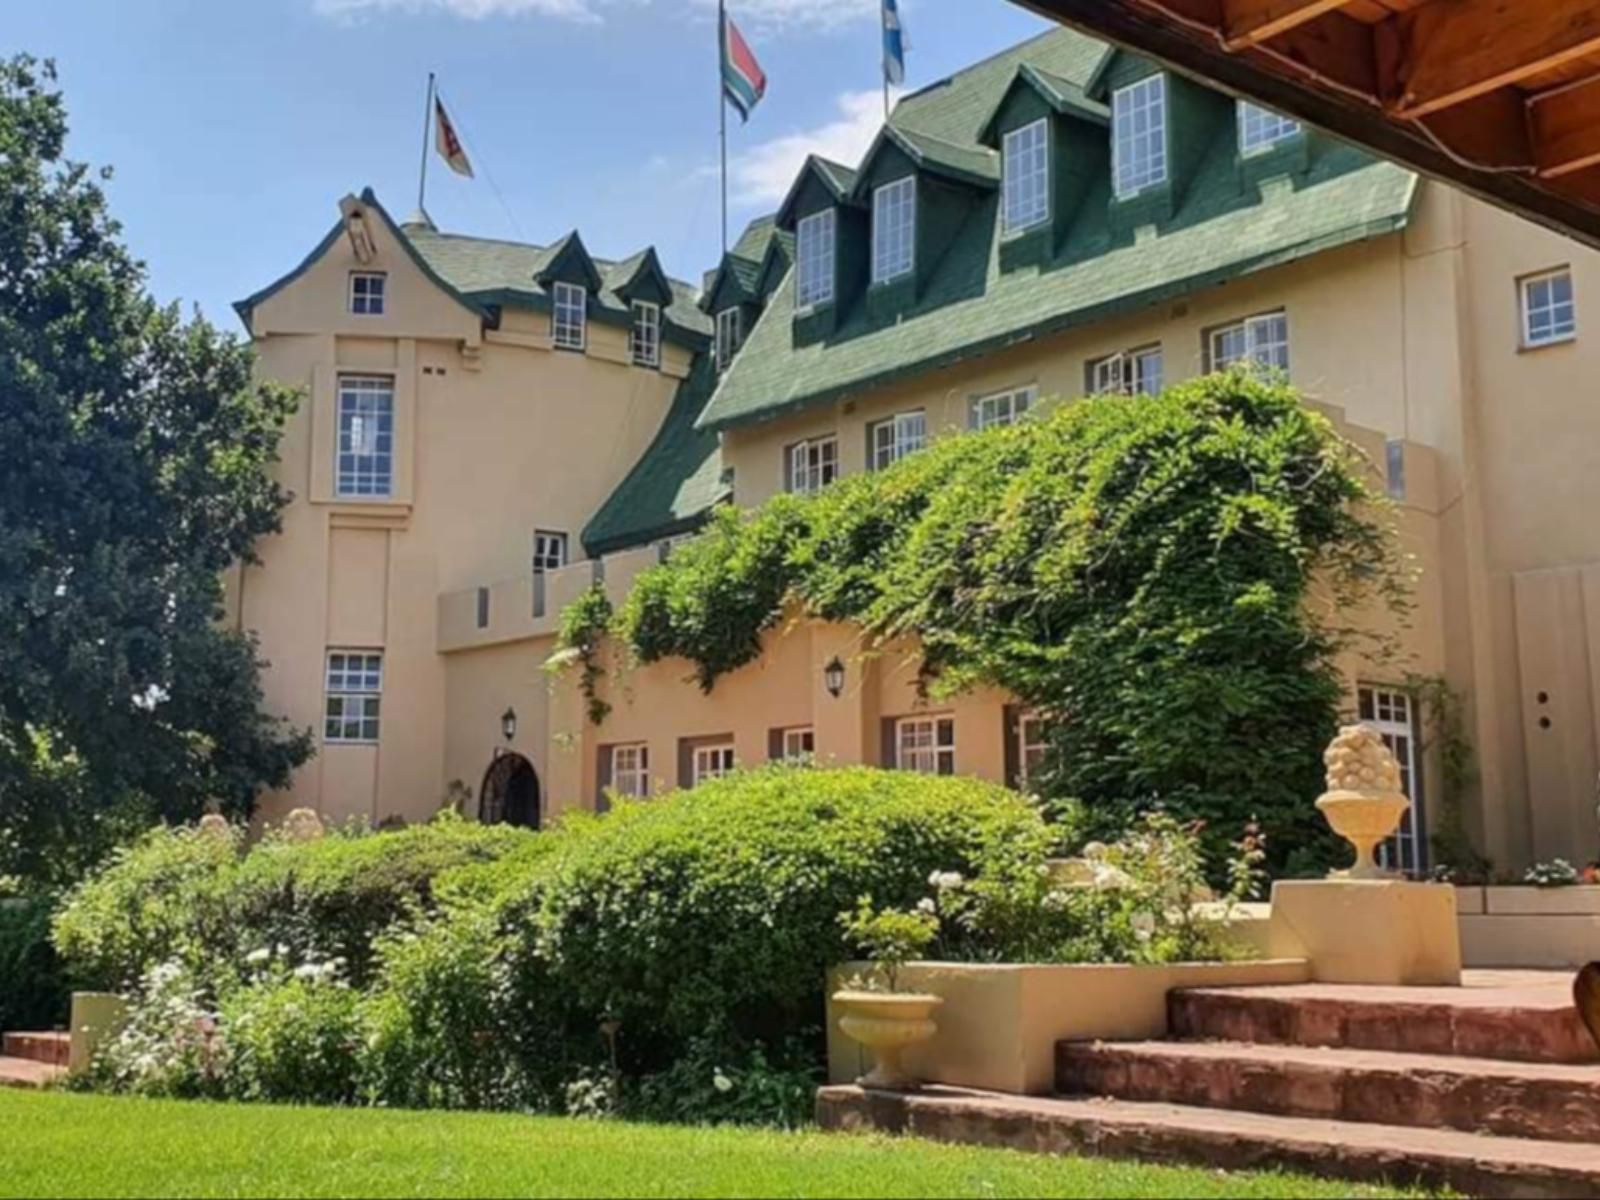 Chartwell Castle And Guest House Chartwell Johannesburg Gauteng South Africa Building, Architecture, House